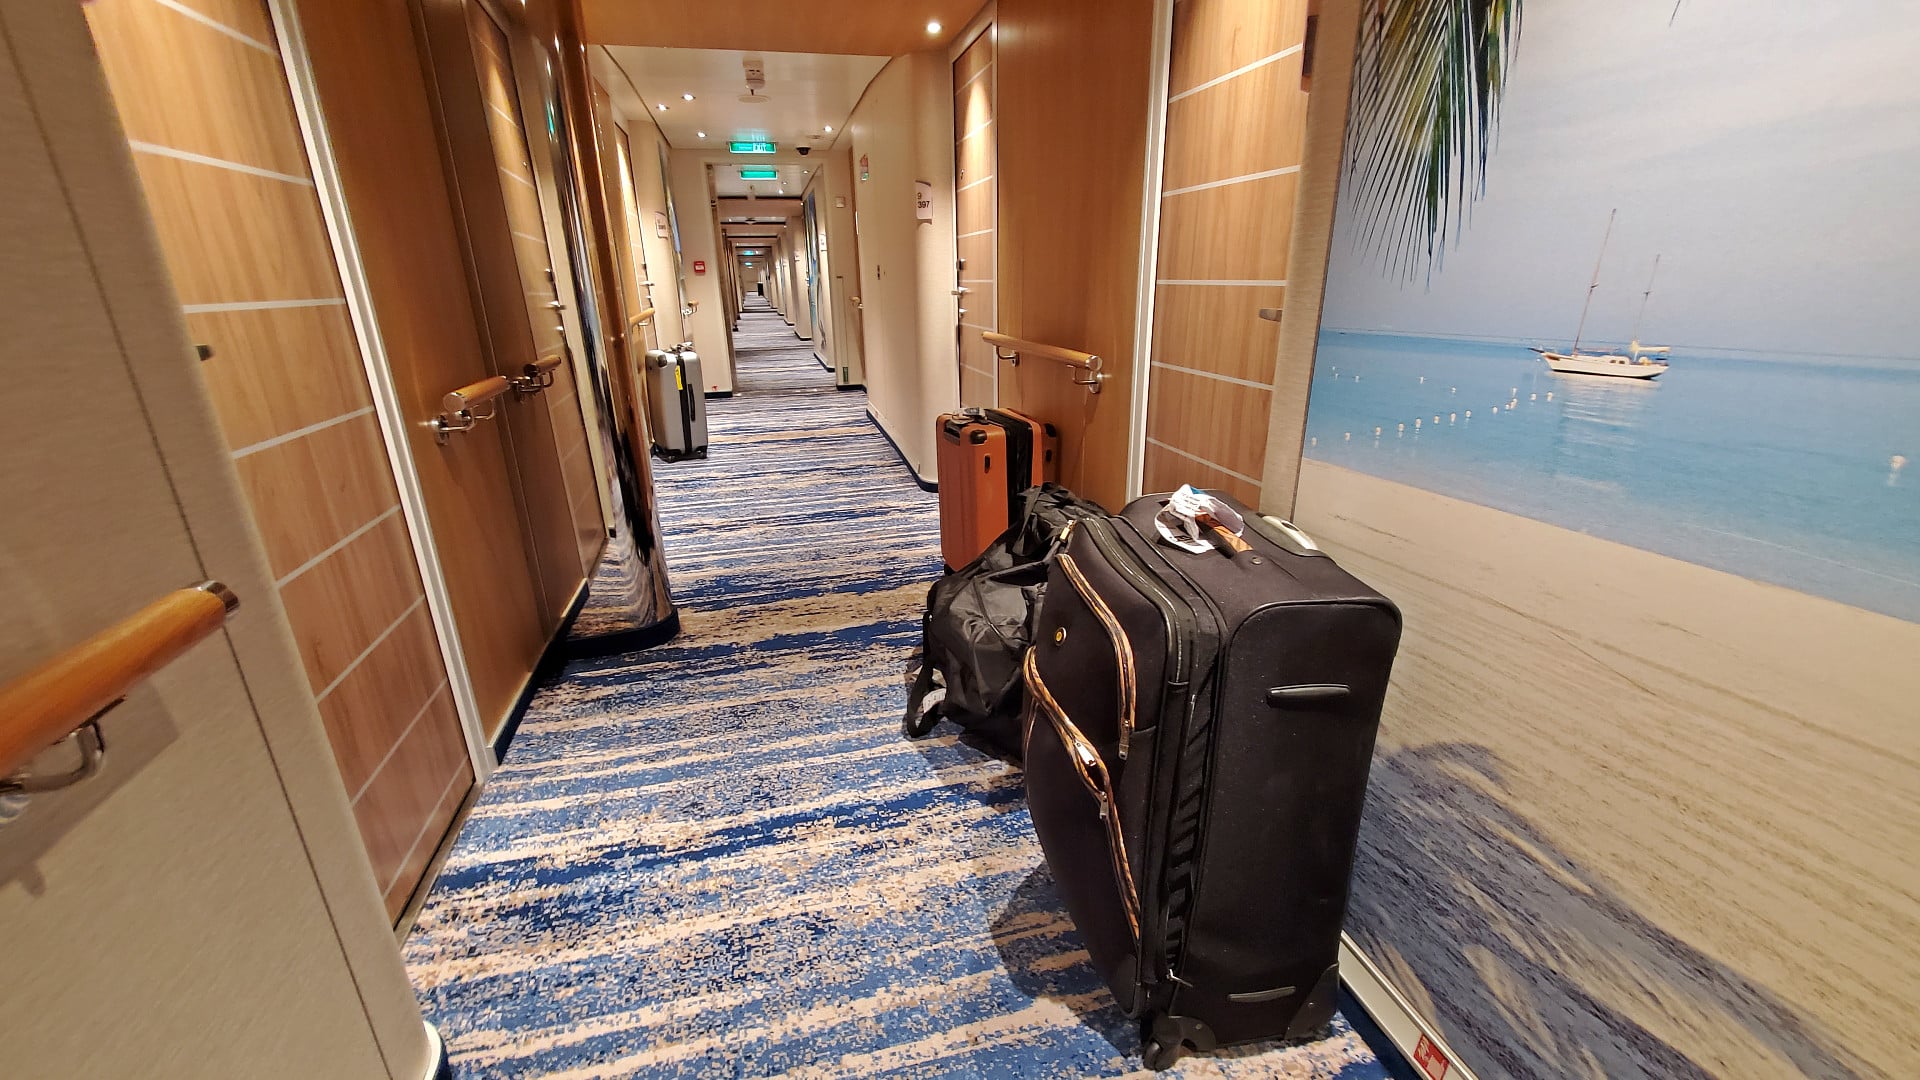 Suitcase and luggage in cruise ship hallway in front of cabins